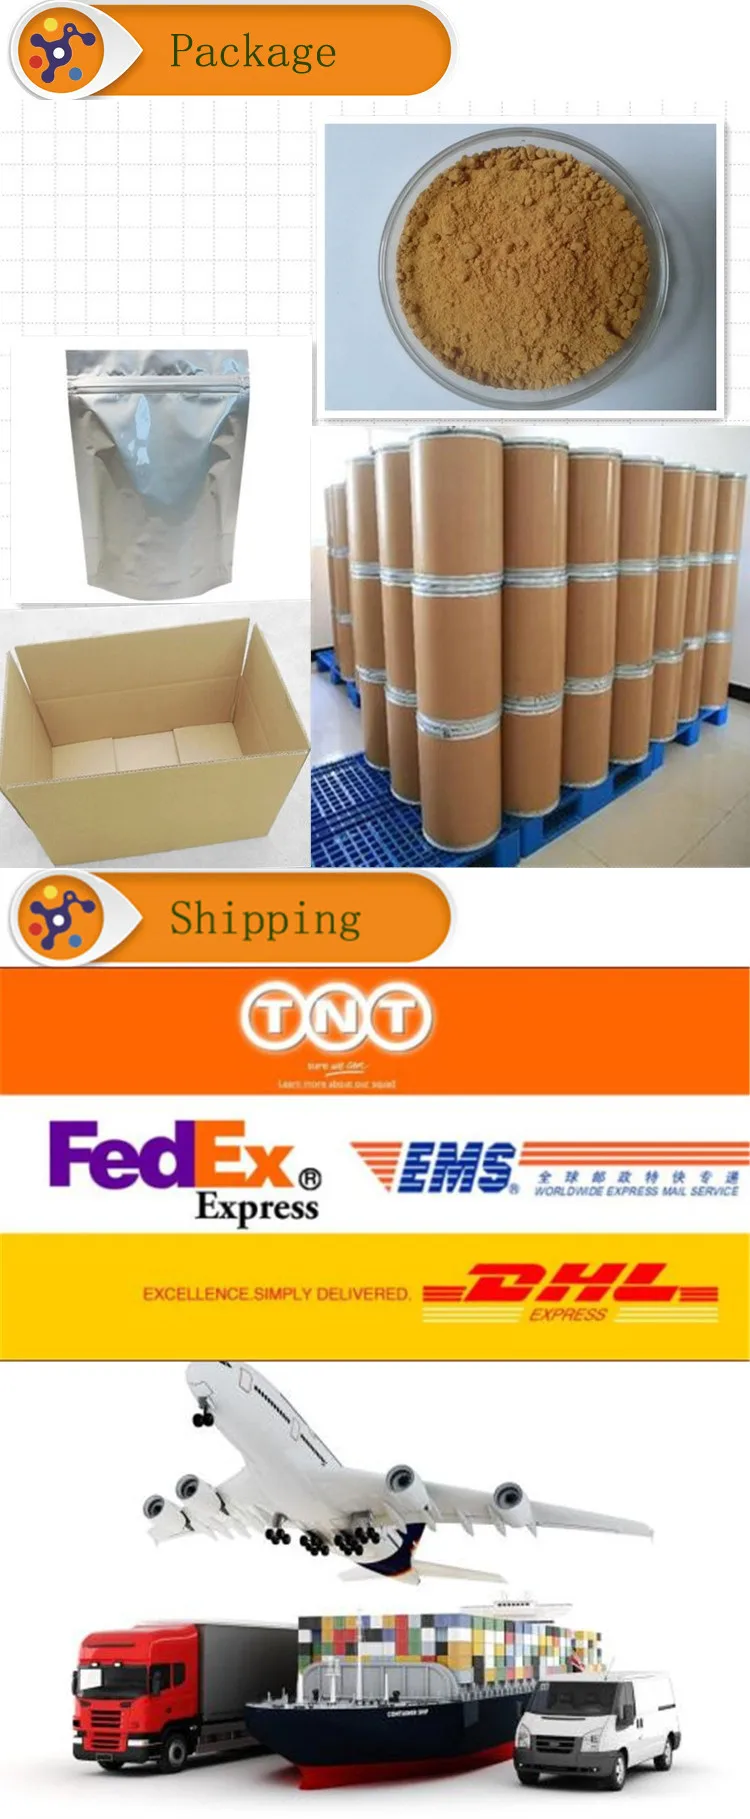 package&shipping